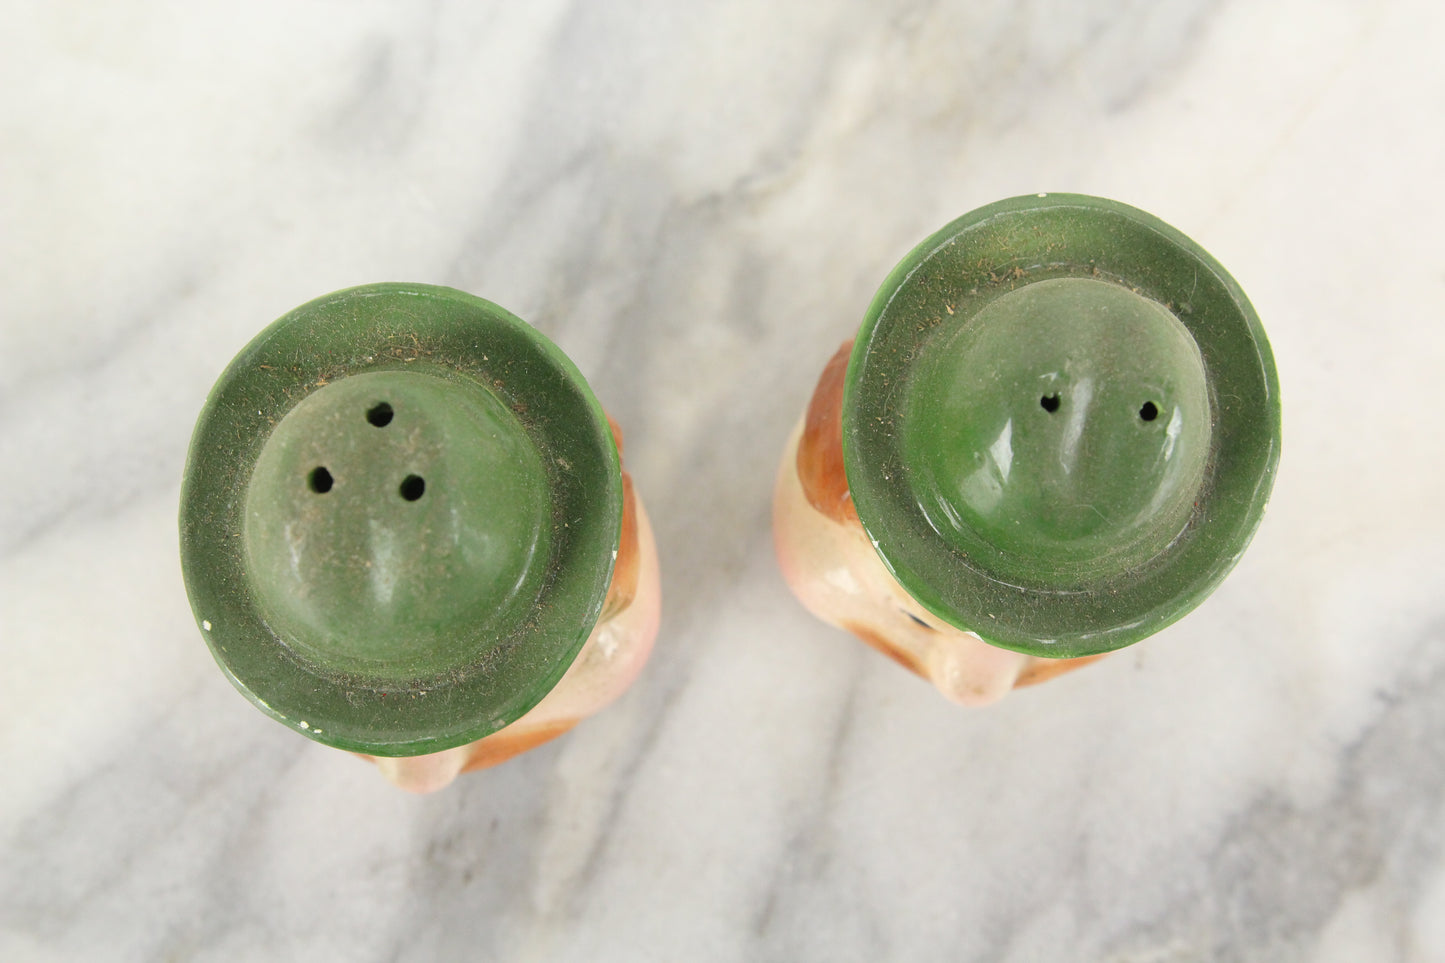 Cheeky Irish Man Porcelain Salt and Pepper Shakers, Made in Japan